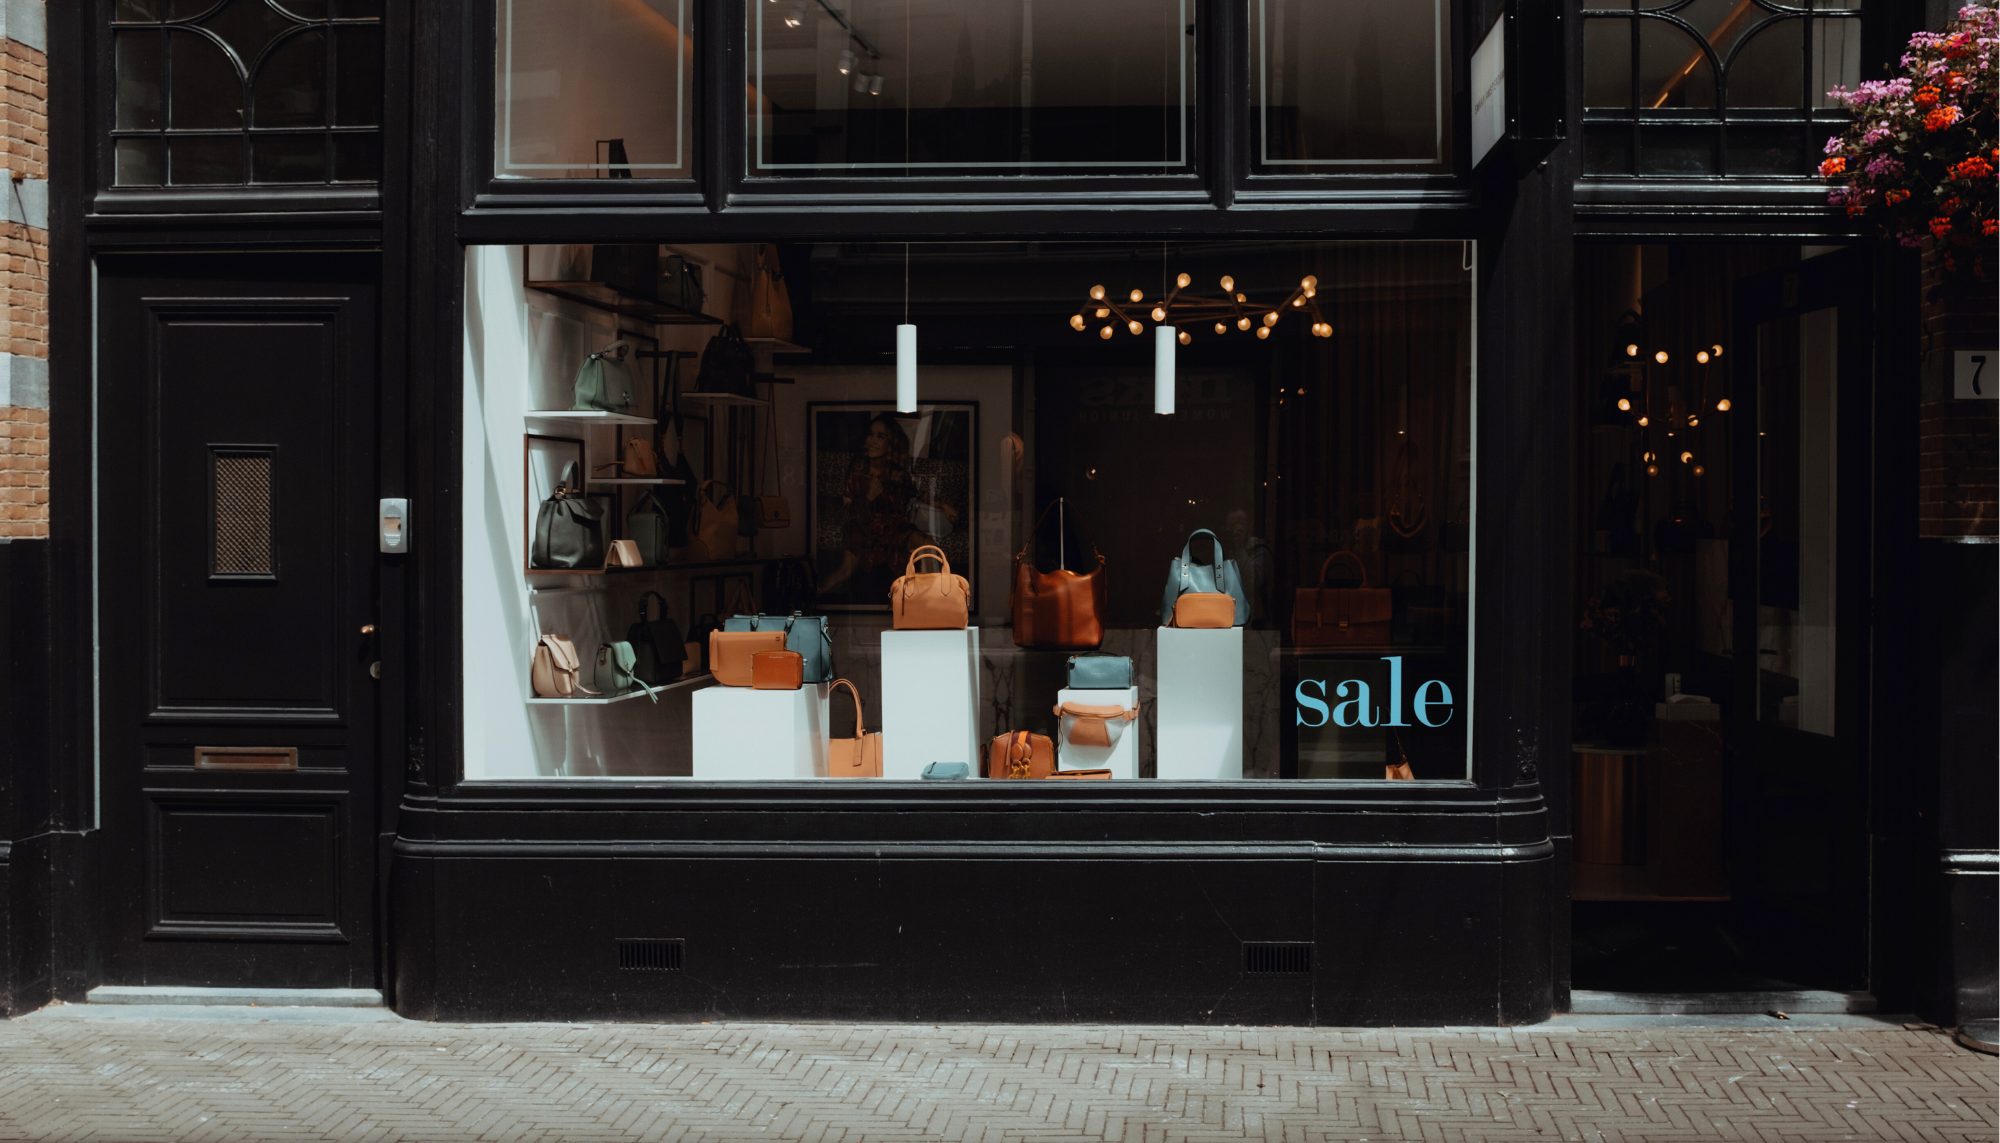 # Tips to Create Retail Window Displays that Dazzle and Drive Foot Traffic